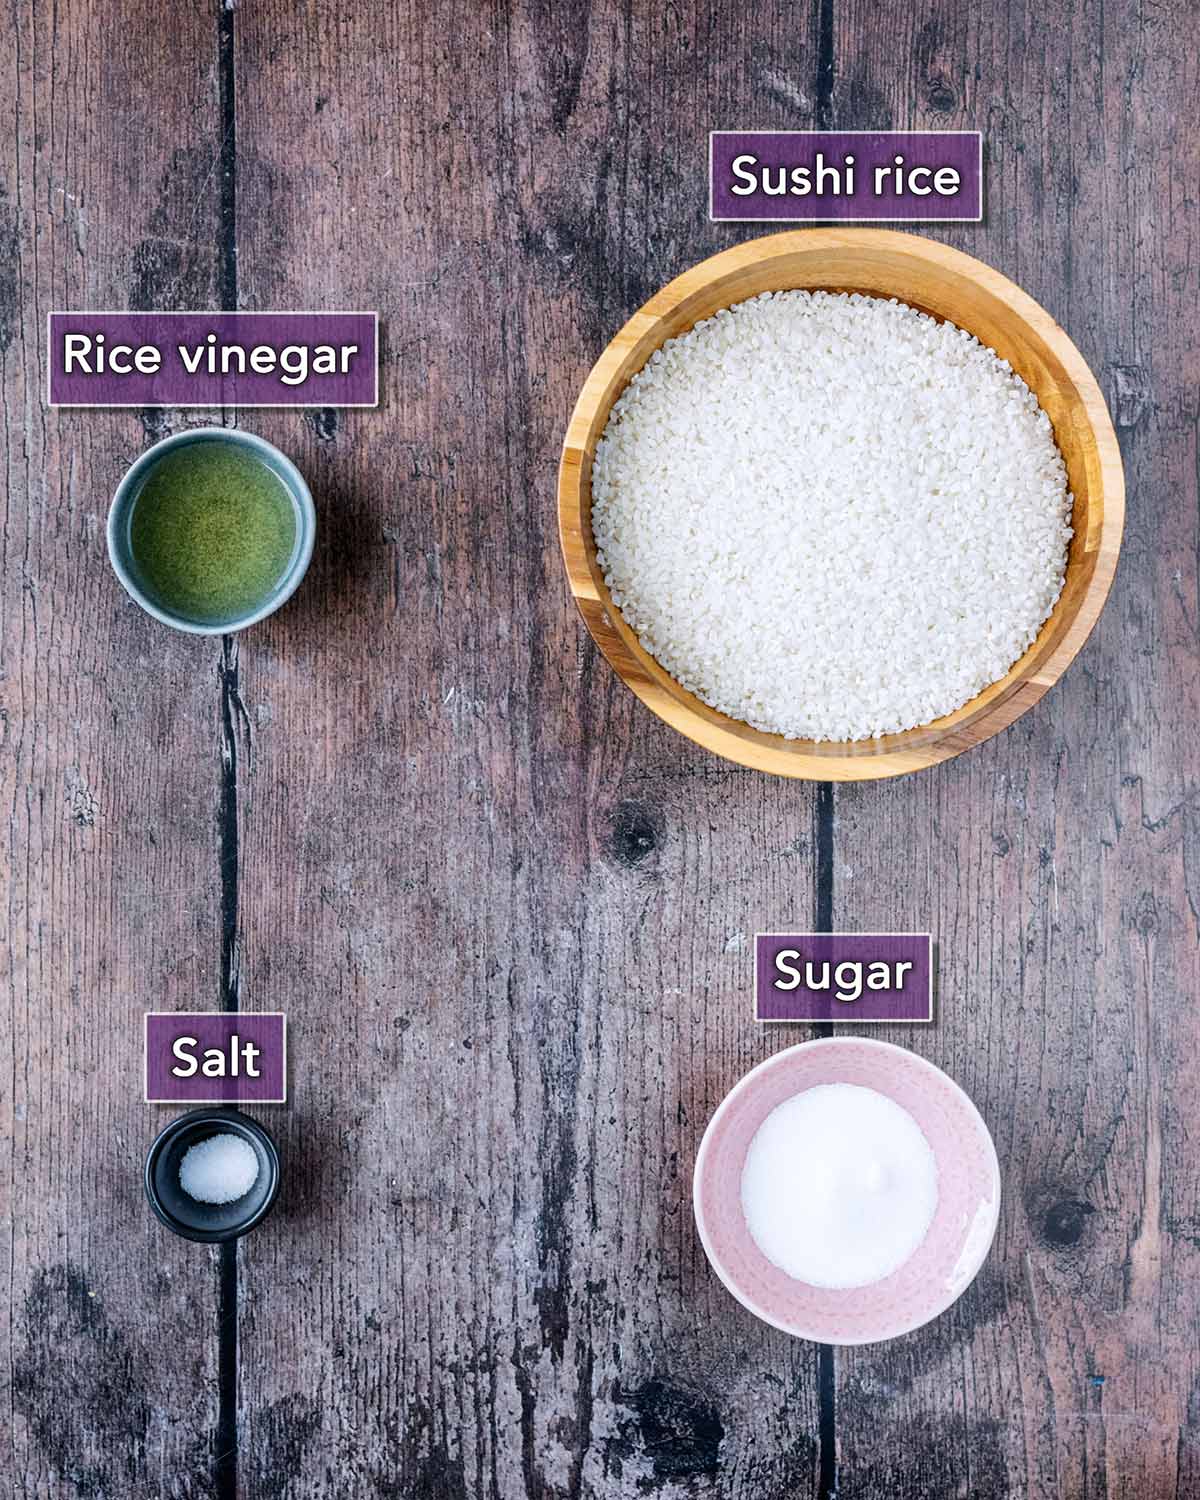 All the ingredients needed to make sushi rice with text overlay labels.